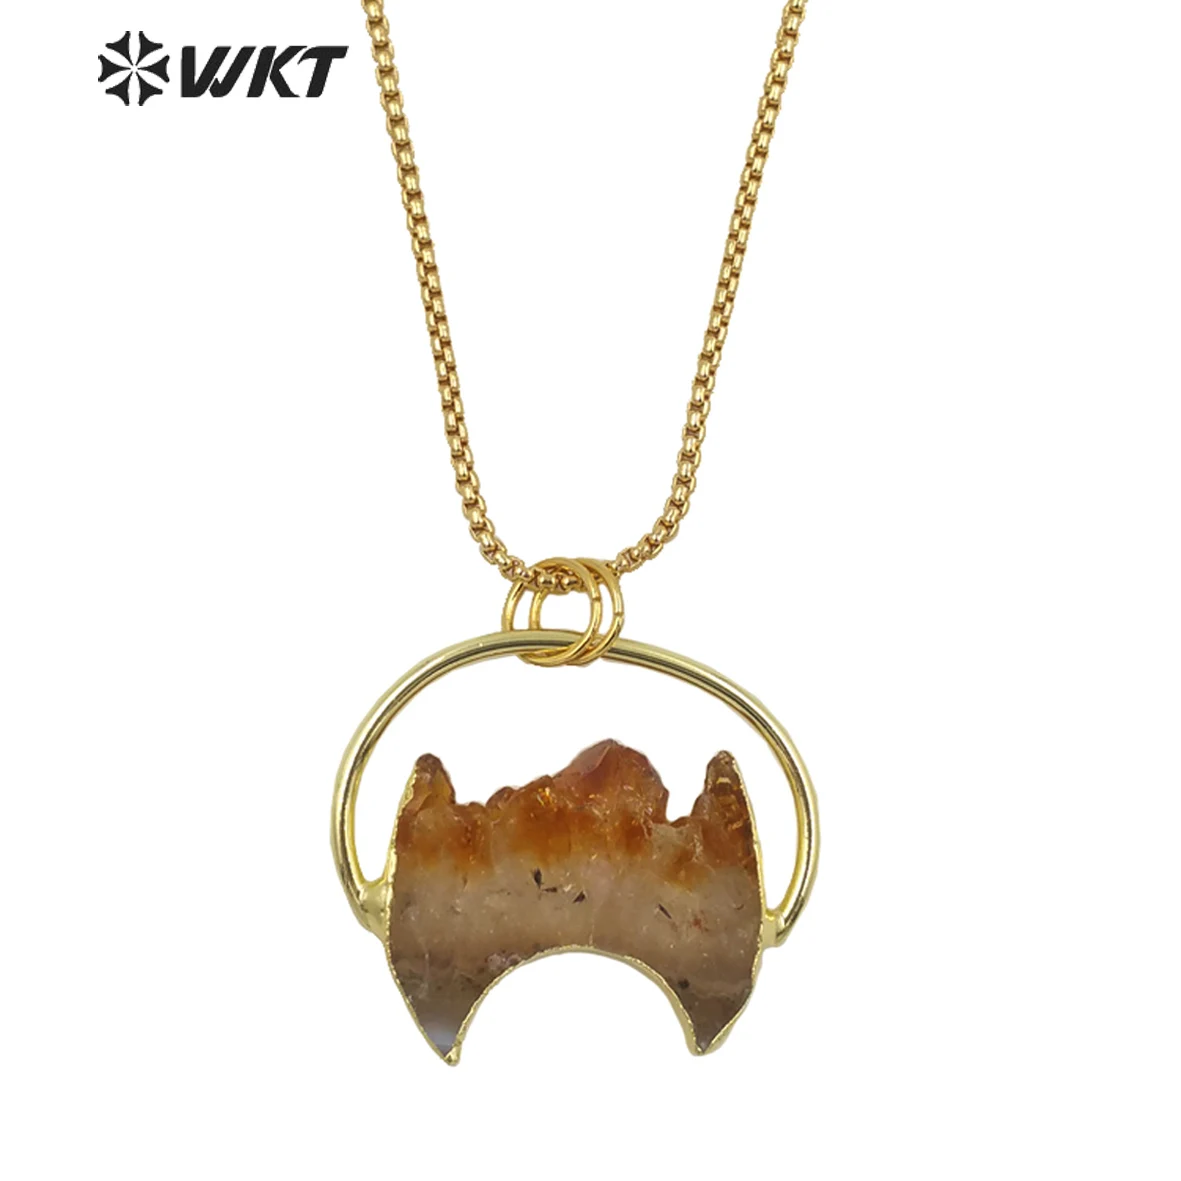 

WT-N1267 WKT Amazing Design Gold Plated Natural Yellow Citrines Quartz Crescent Horn Stone Necklace Precious Birthday Gift